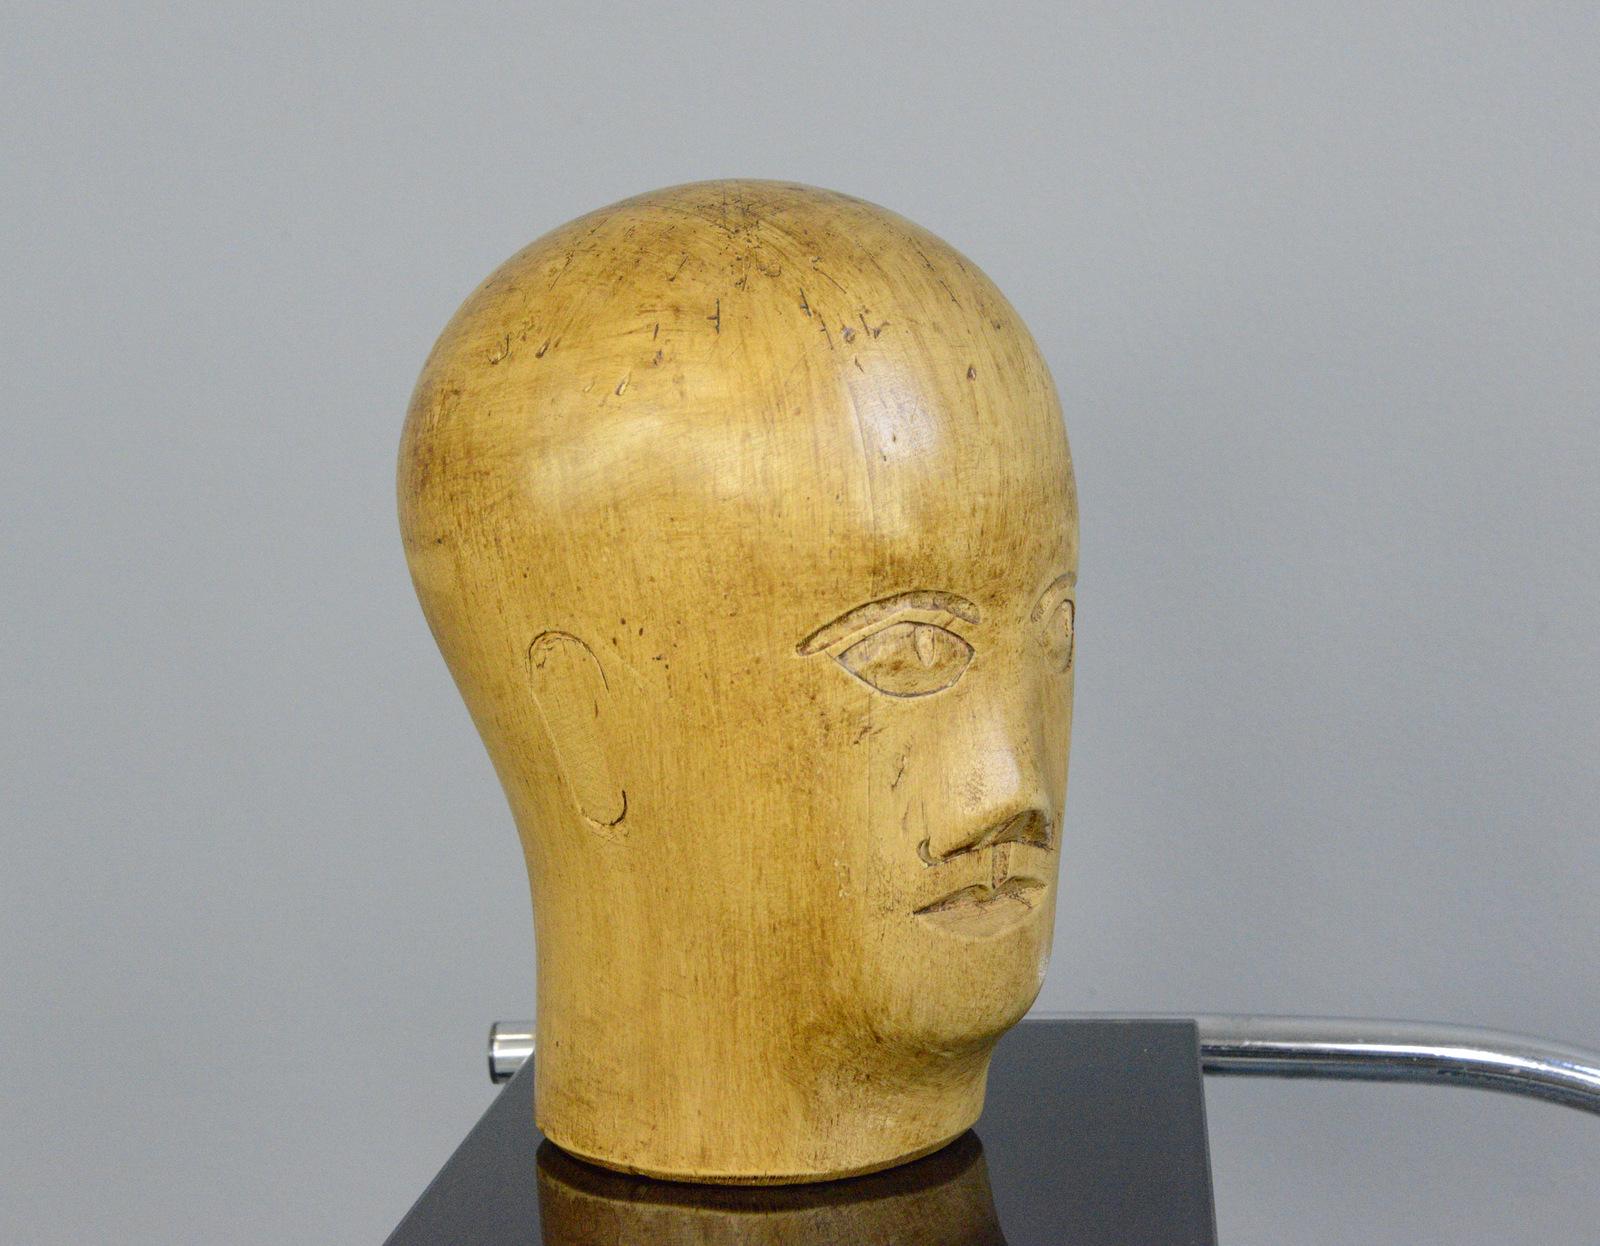 German carved wooden Milliners head circa 1920

- Hand carved from sycamore
- Used in the displaying and making of hats
- German, 1920
- Measures: 25cm tall x 15cm wide x 18cm deep

Condition report

Signs of its previous in the form of pin